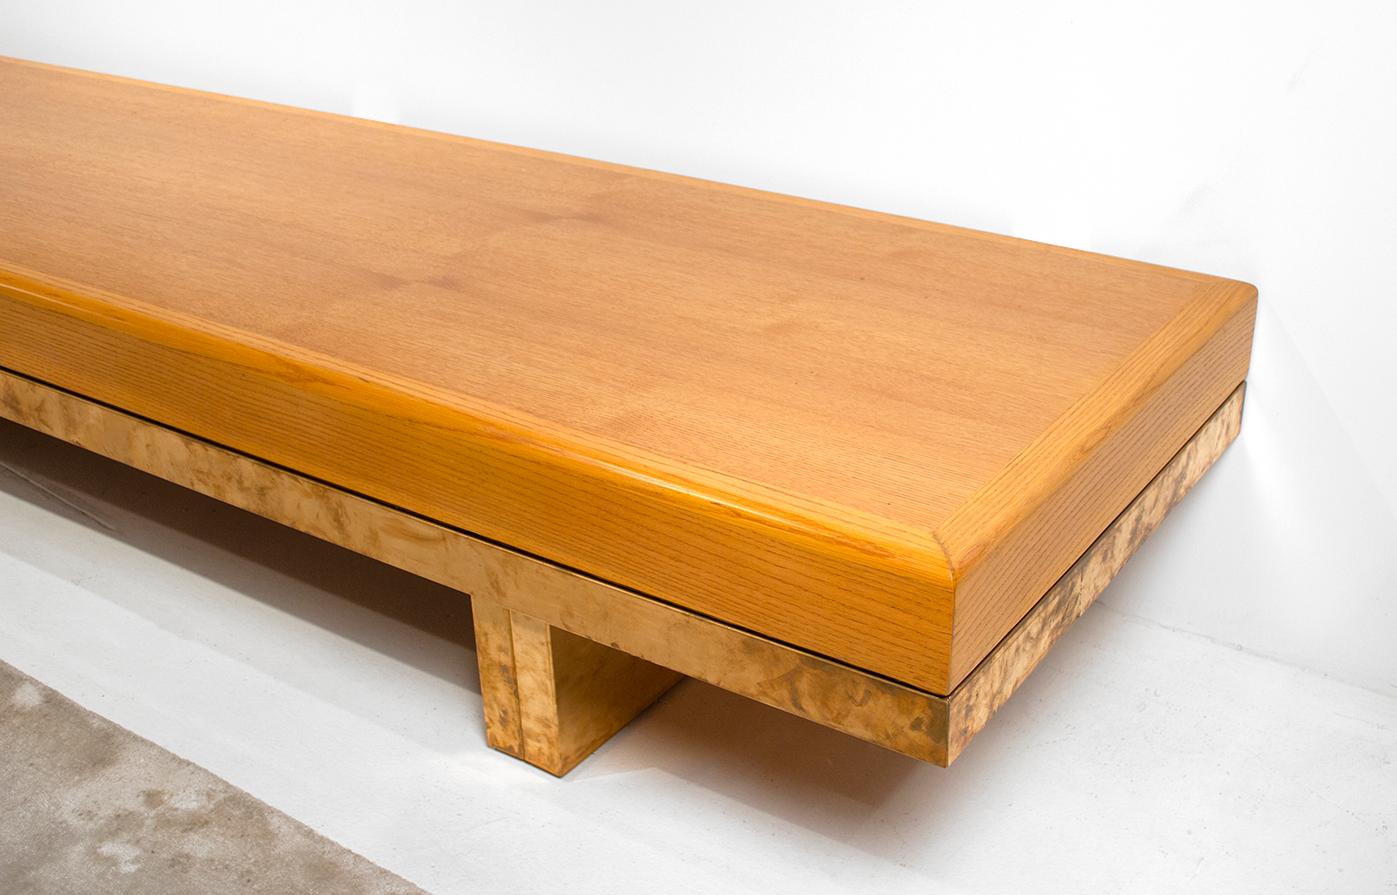 Architectural Bench from the Iconic I.M. Pei Dallas City Hall For Sale 4